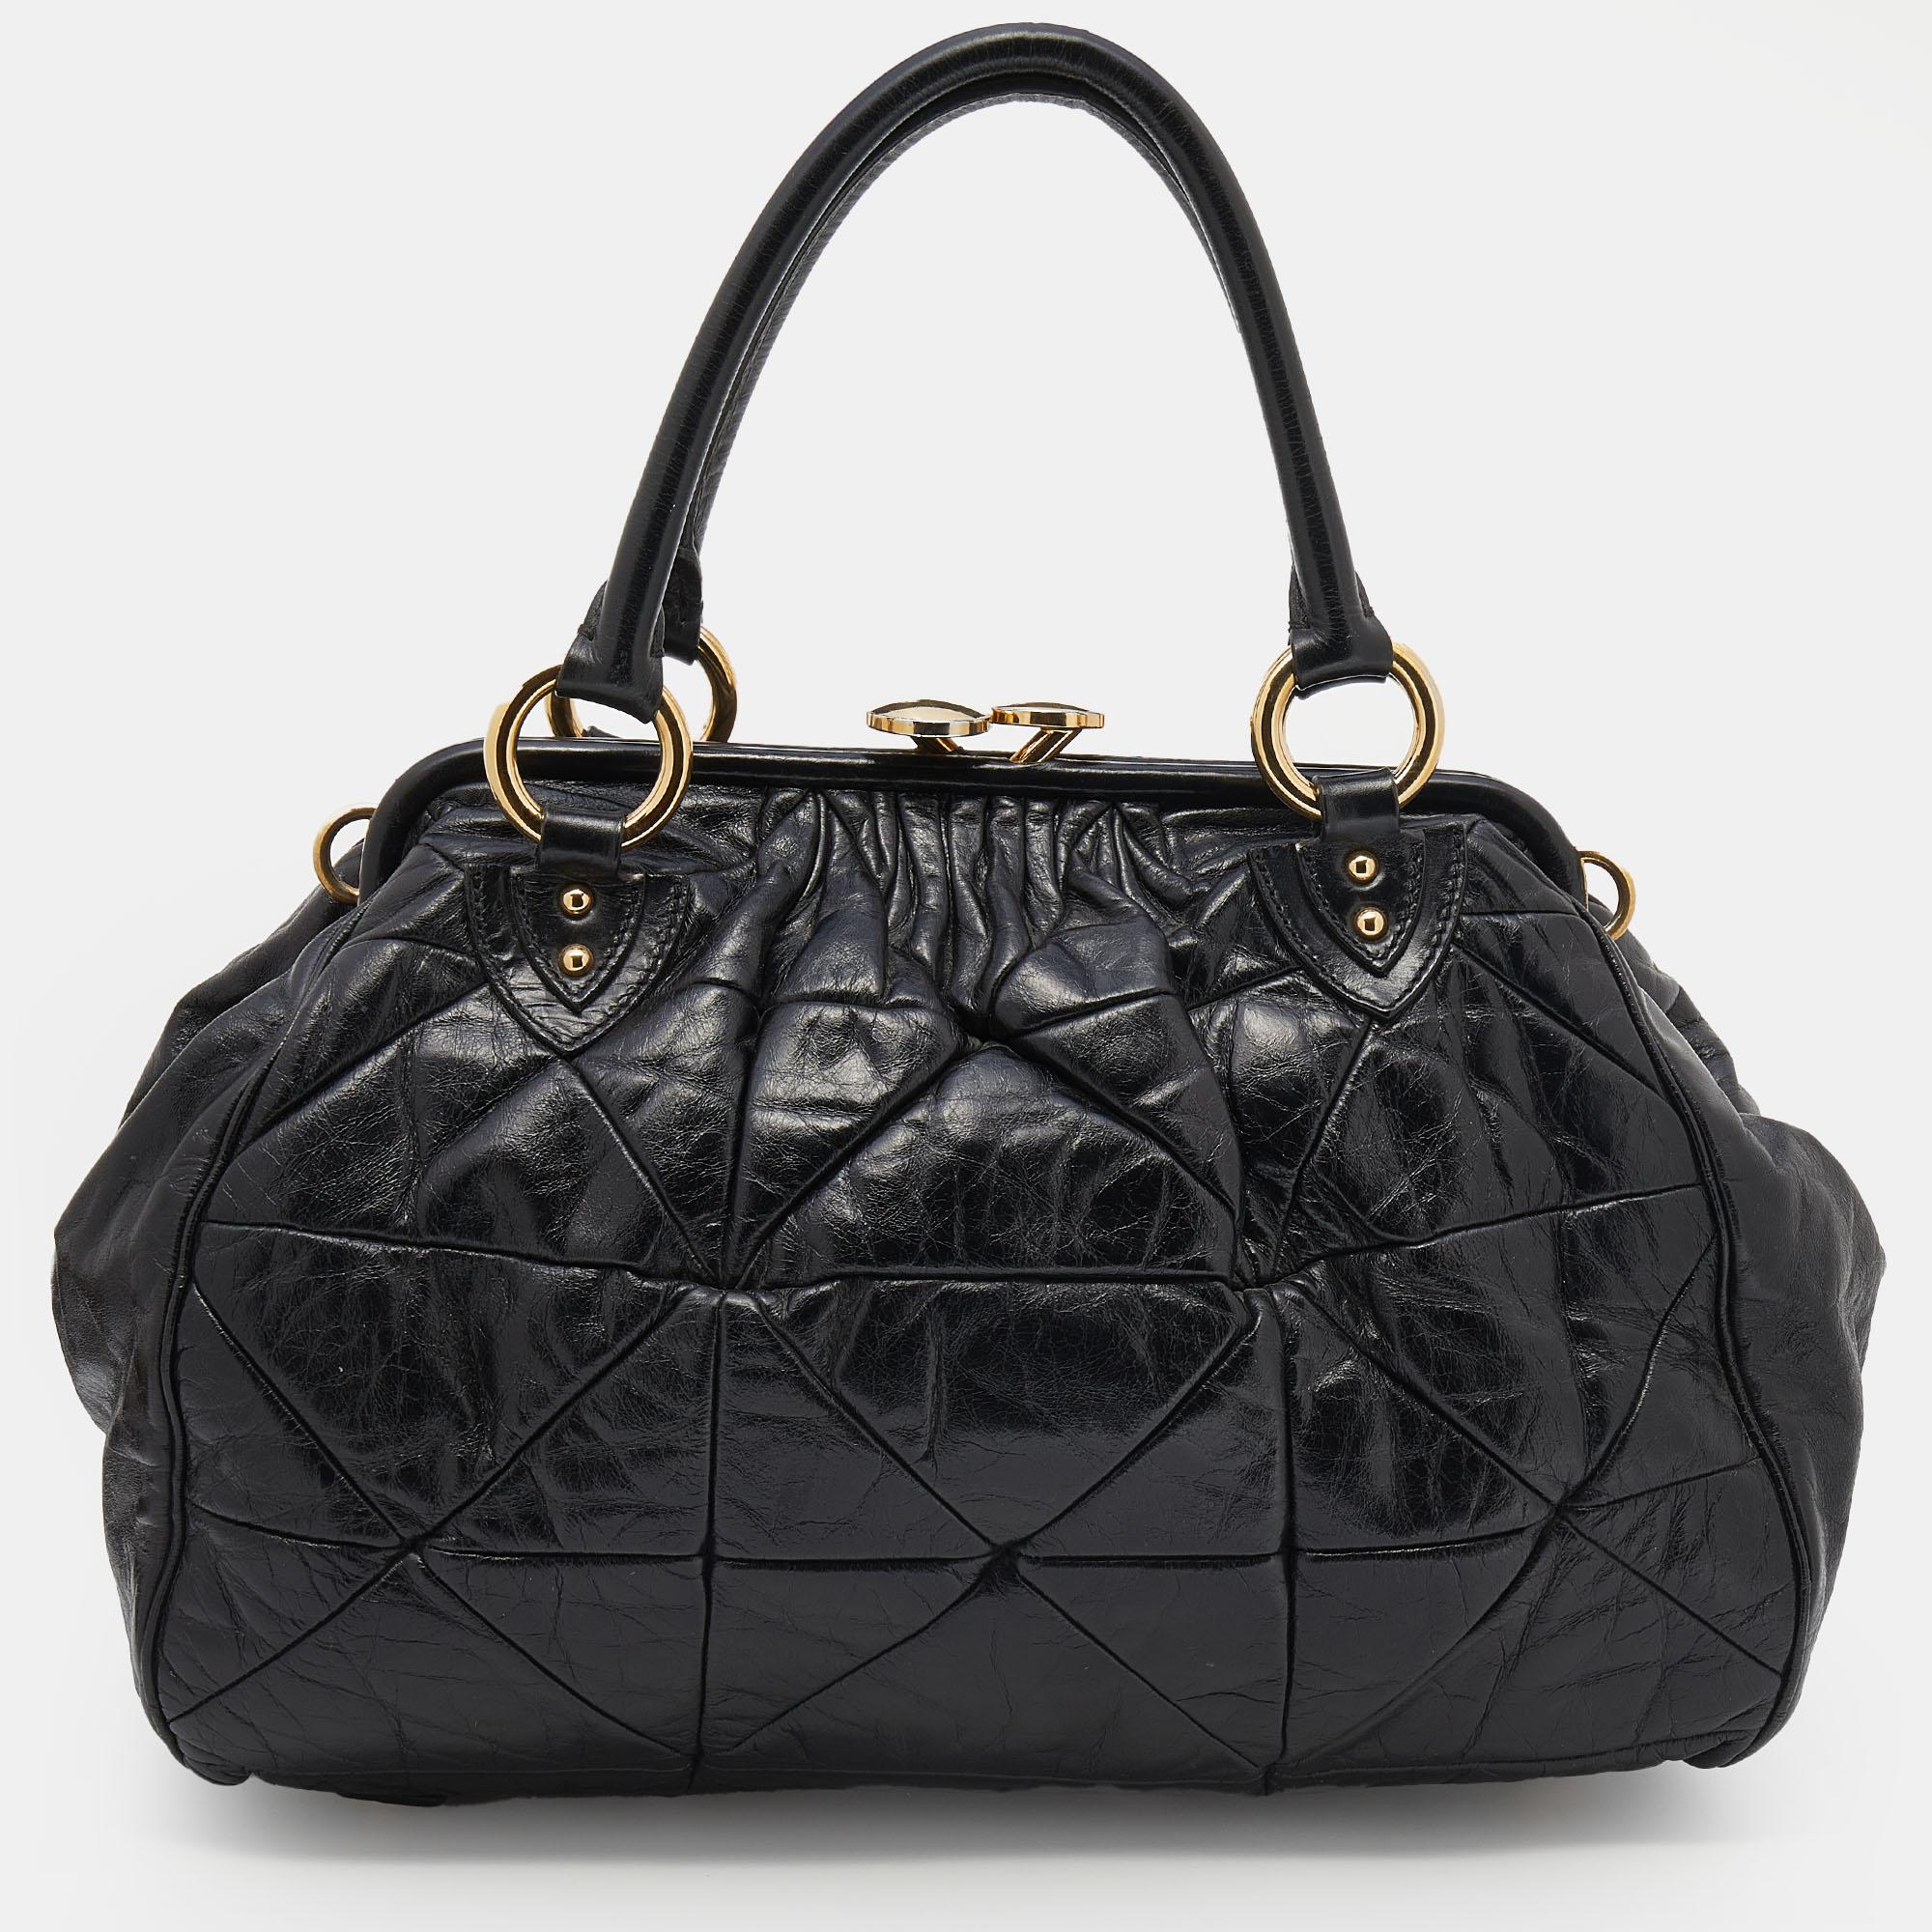 This Marc Jacobs design has a black quilted exterior crafted from leather and is enhanced with gold-tone hardware. This elegant Stam satchel features a kiss-lock top closure that opens to a fabric interior. It has dual top handles and a chain strap